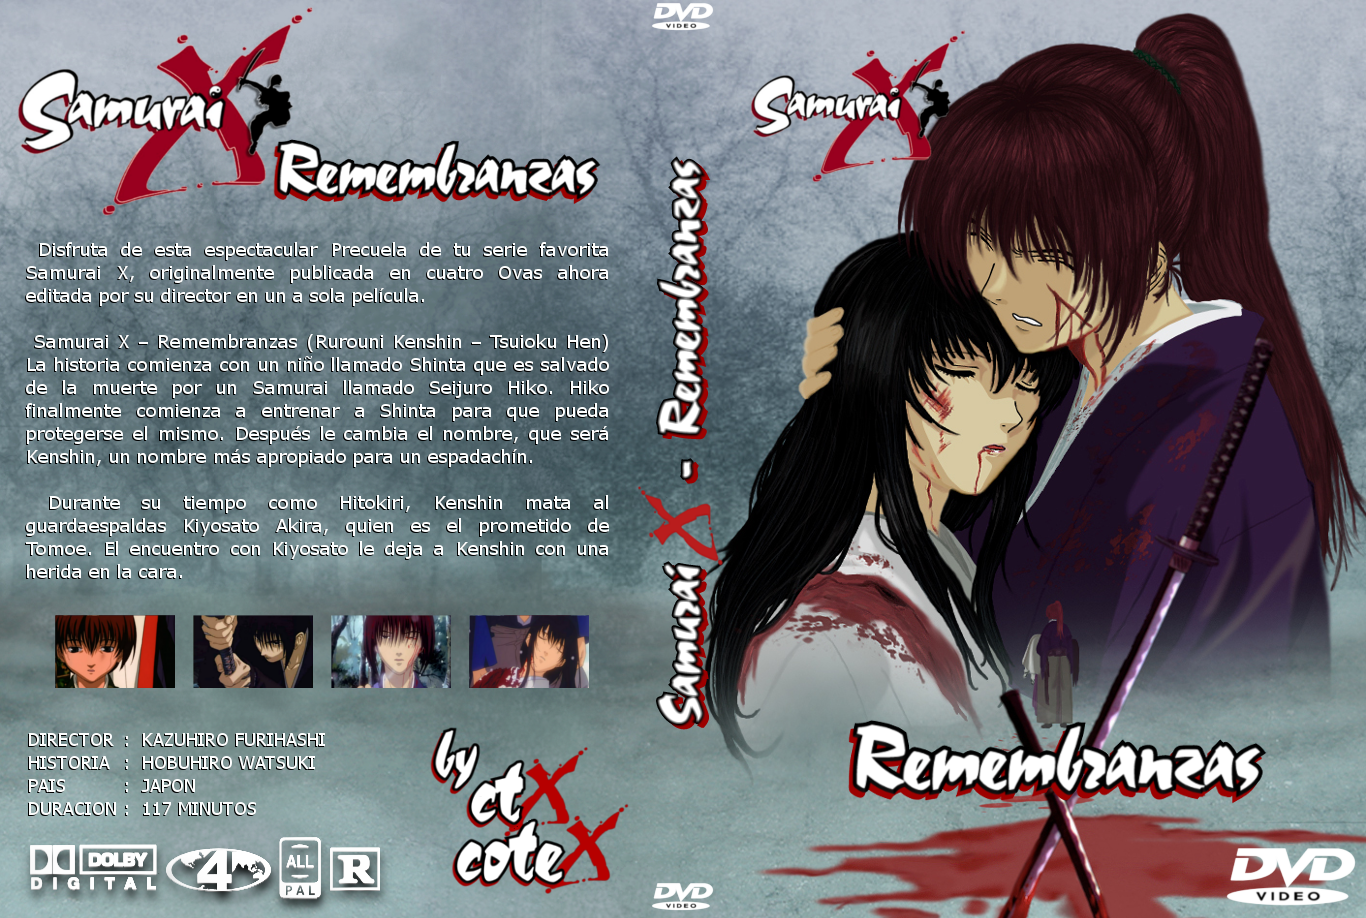 Download this Ver Ovas Samurai Lista Trust And Betrayal picture